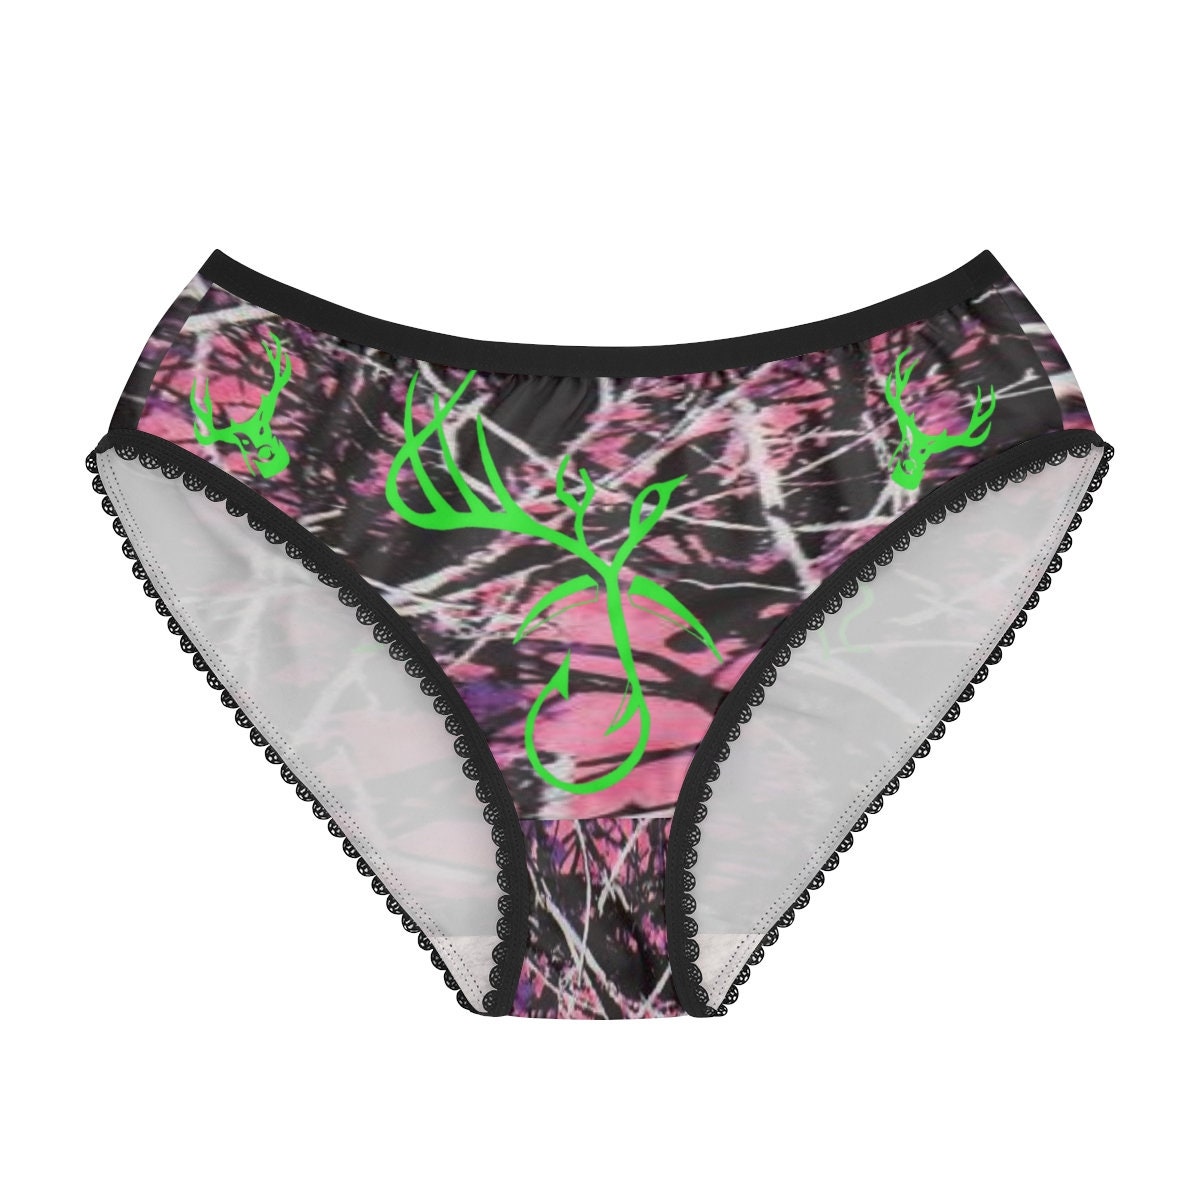 Realtree Camouflage Panties for Women